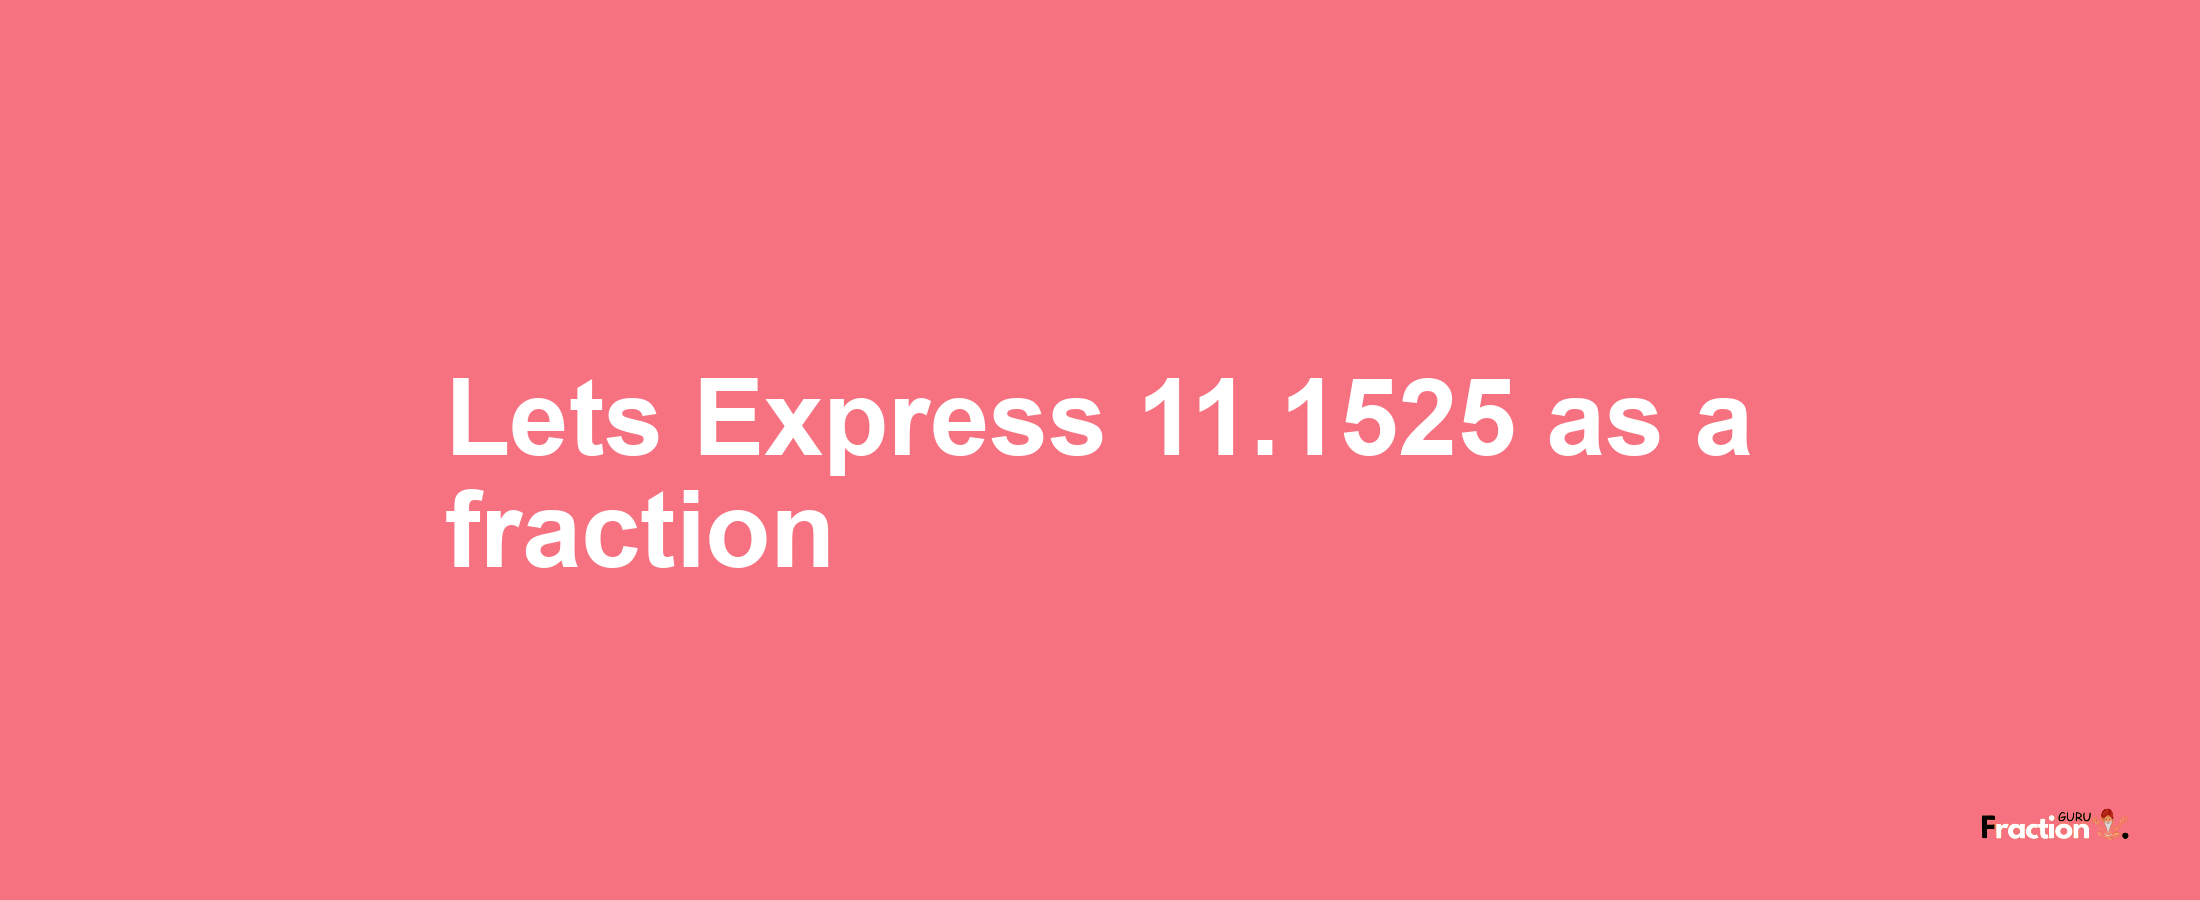 Lets Express 11.1525 as afraction